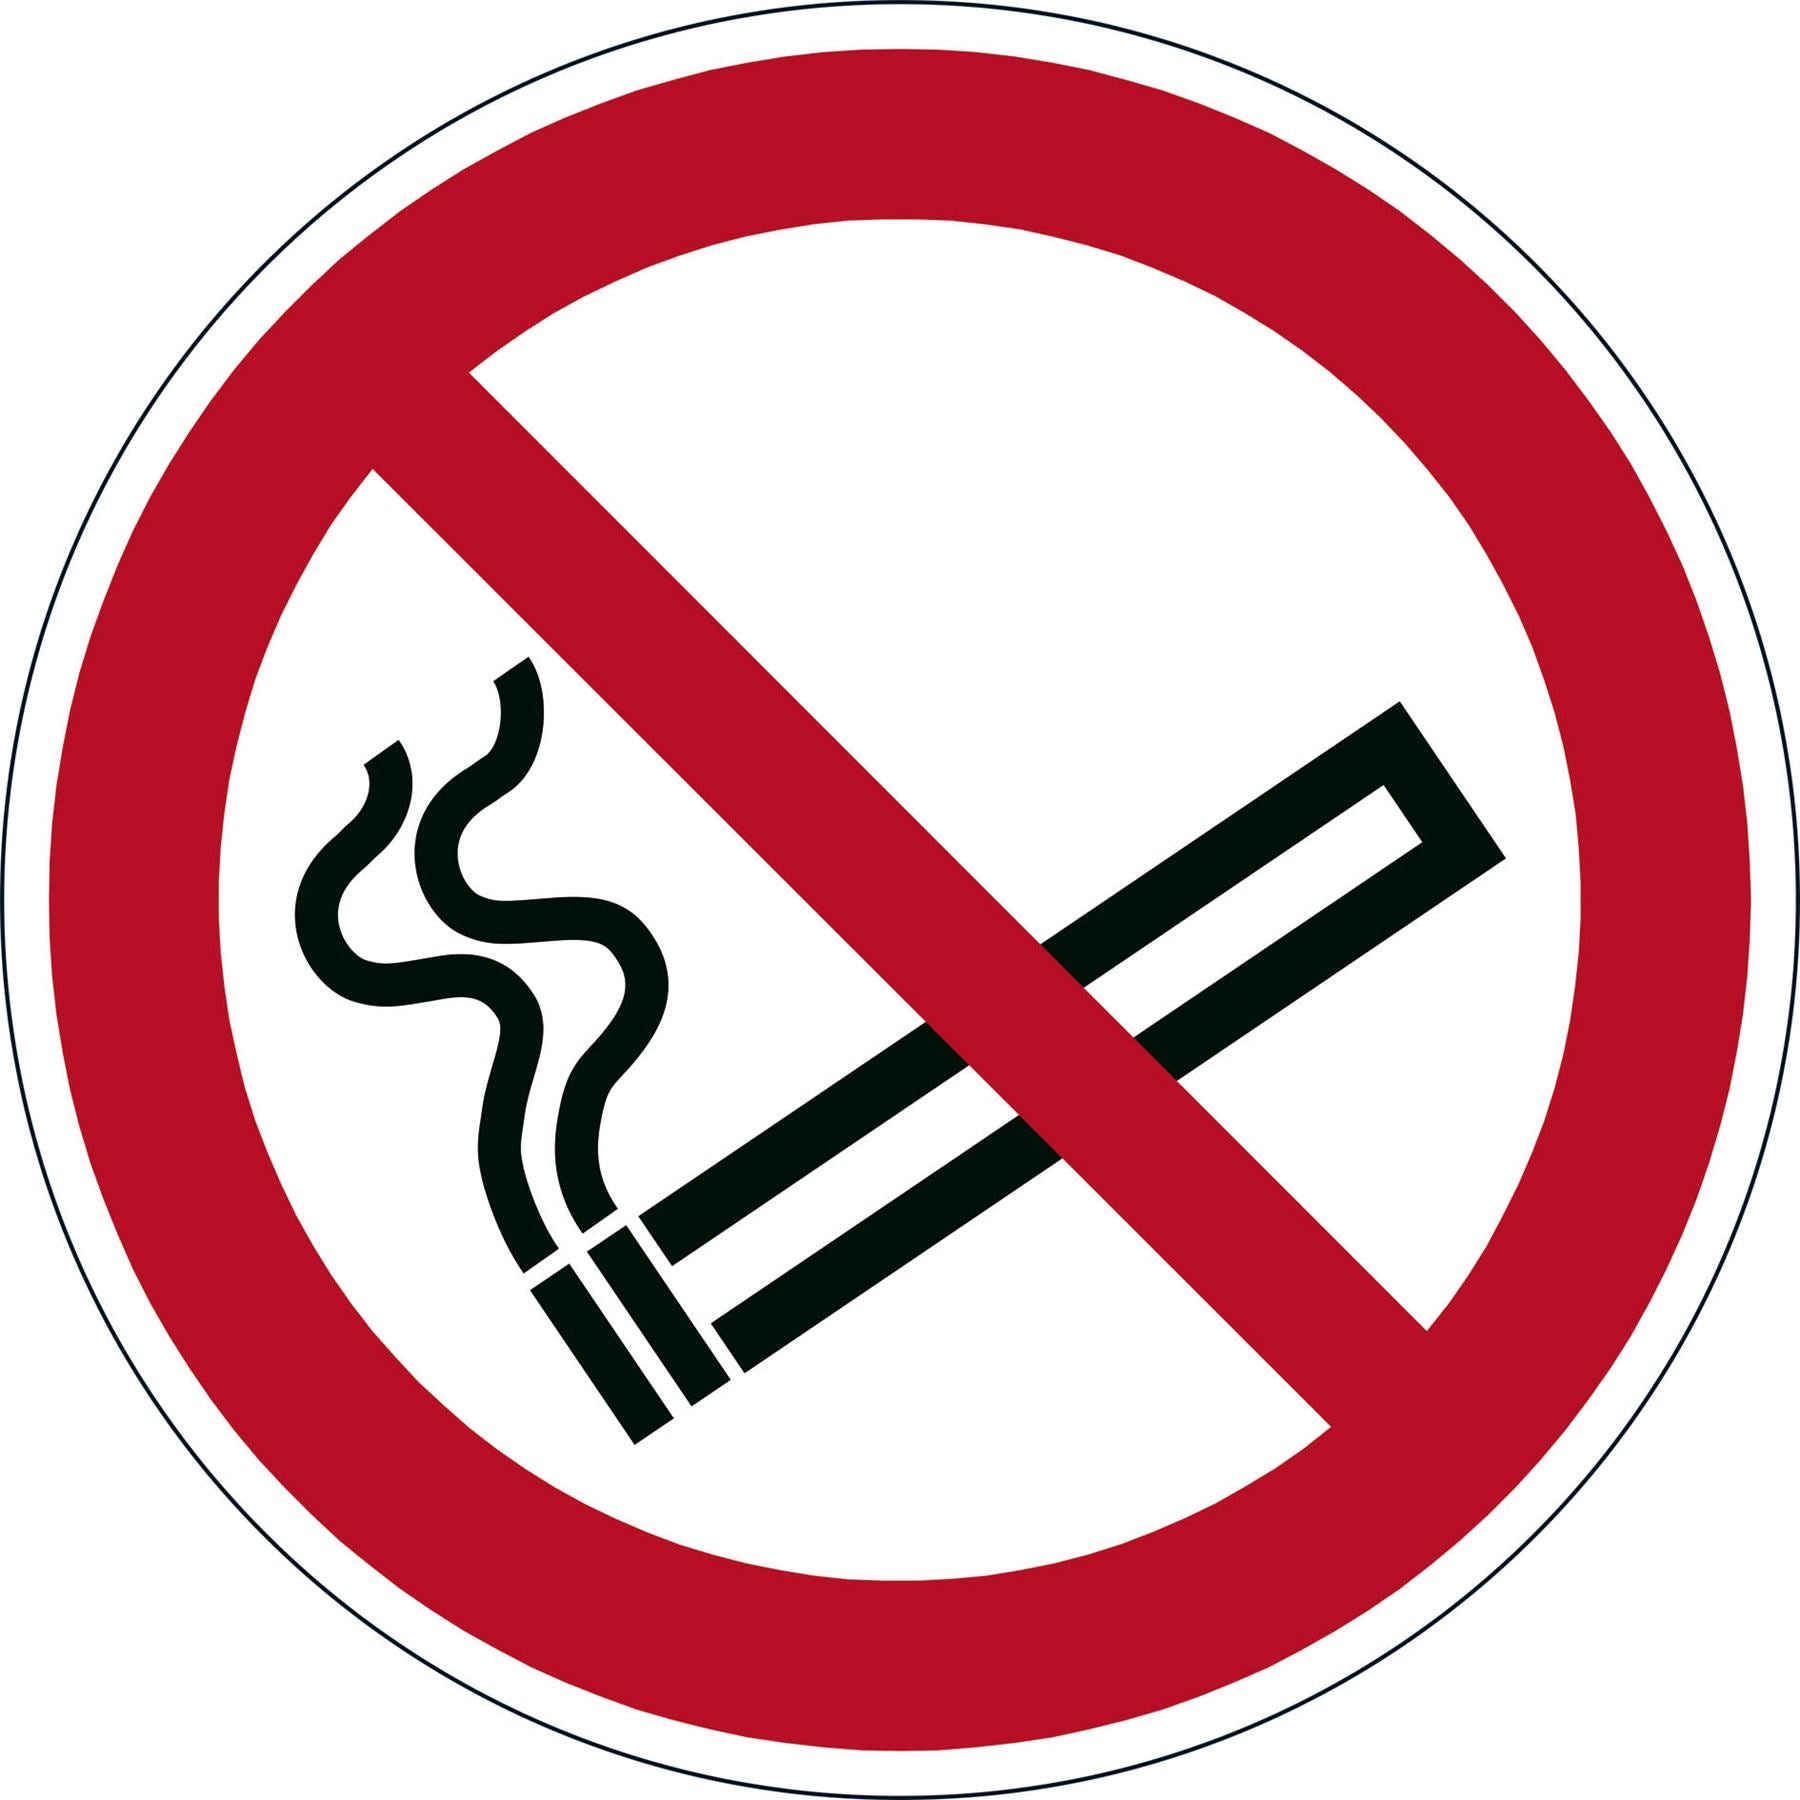 Durable Adhesive ISO "No Smoking" Prohibition Sign Safety Floor Sticker | 43cm